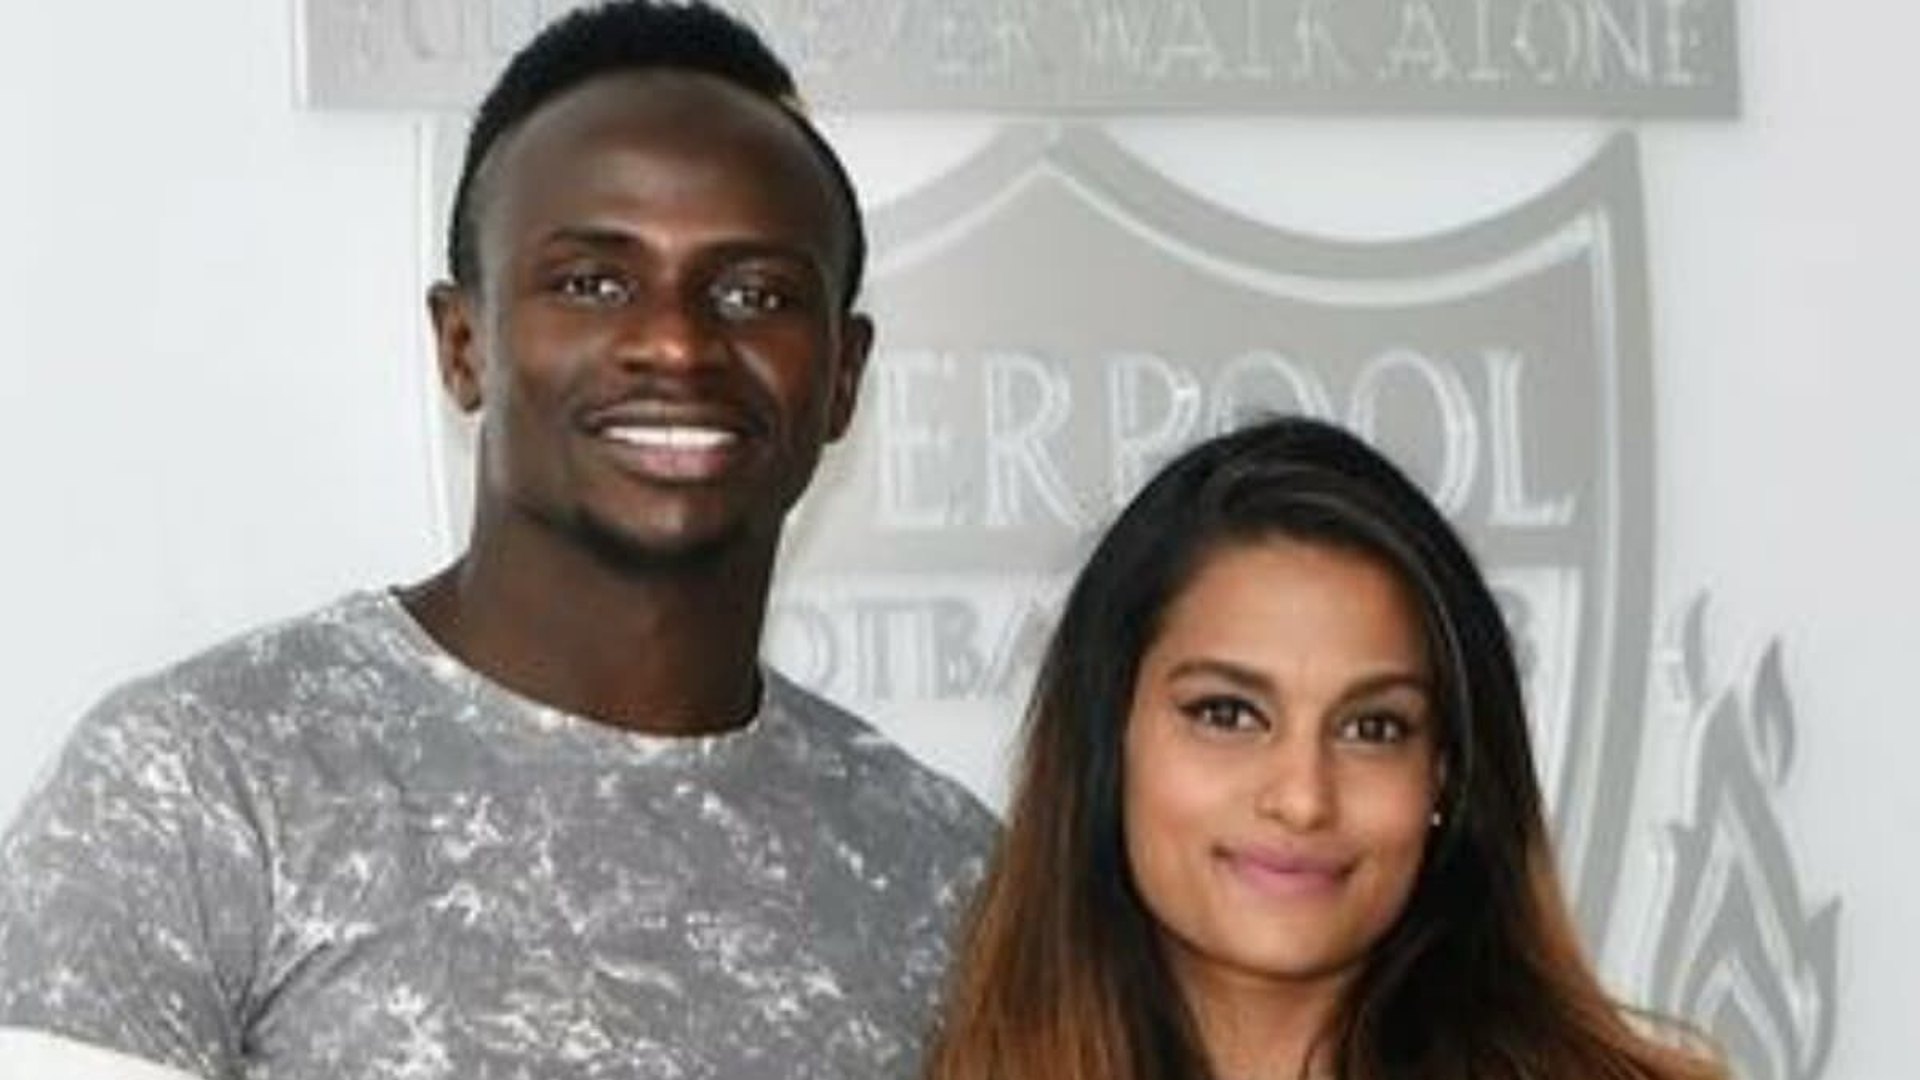 Who is Sadio Mane’s girlfriend? Know all about Melissa Reddy